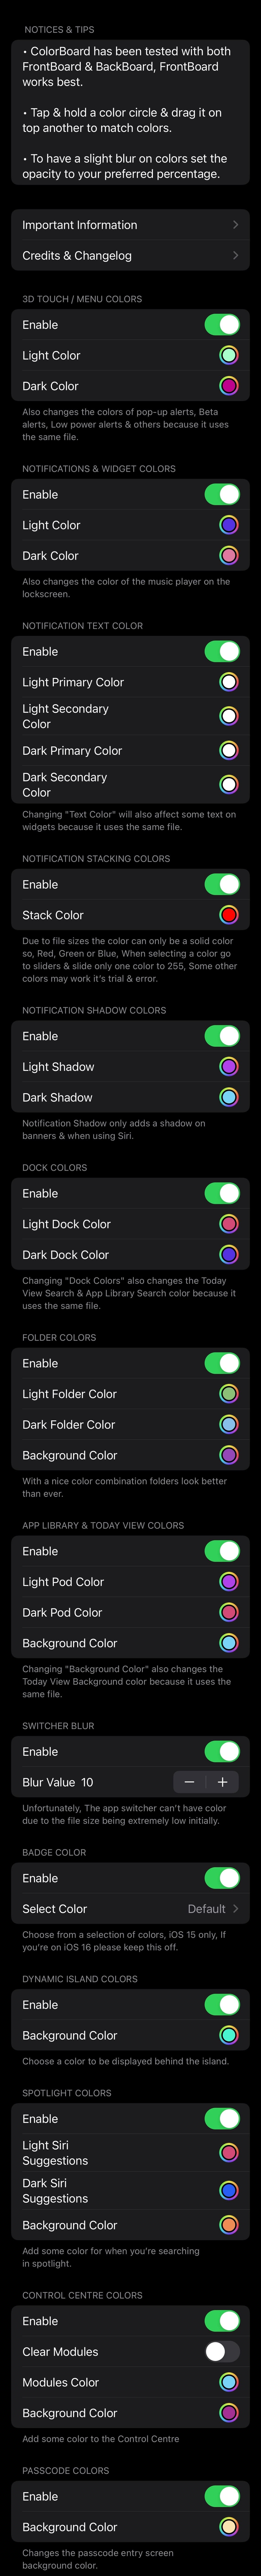 ColorBoard options to configure.